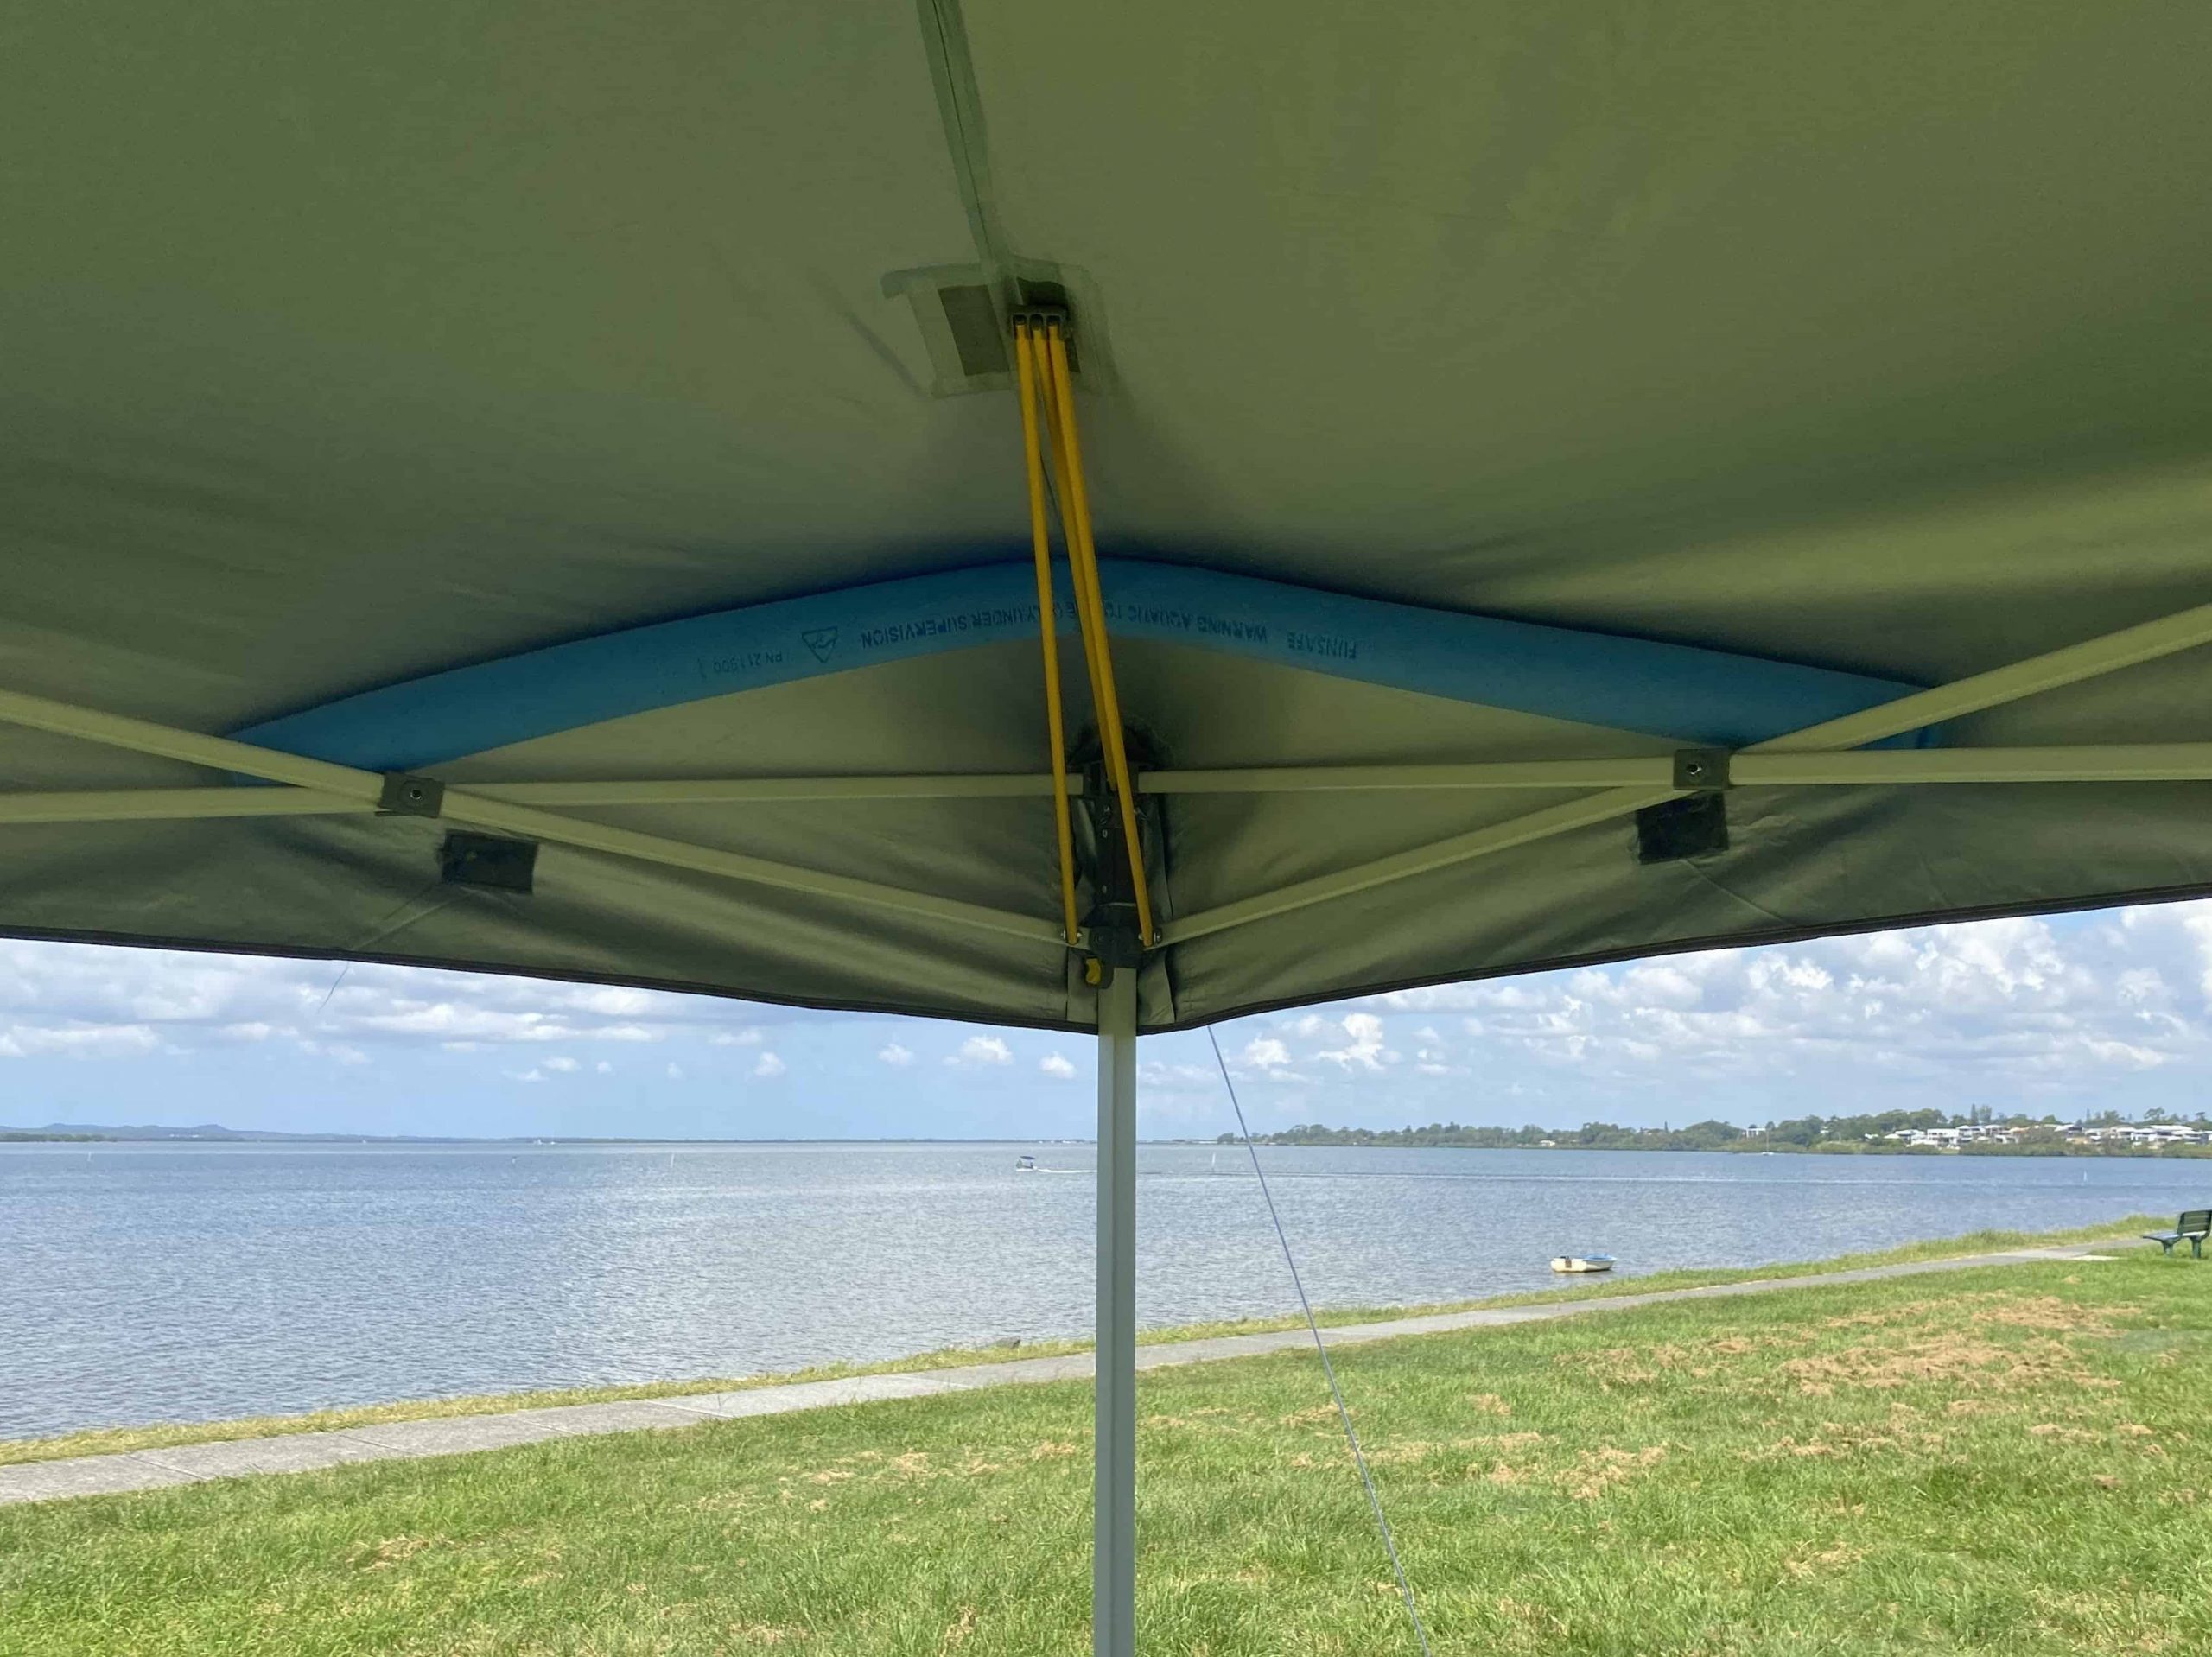 How to keep water from pooling on canopy, a pool noodle wedged into the underside of a pop up canopy